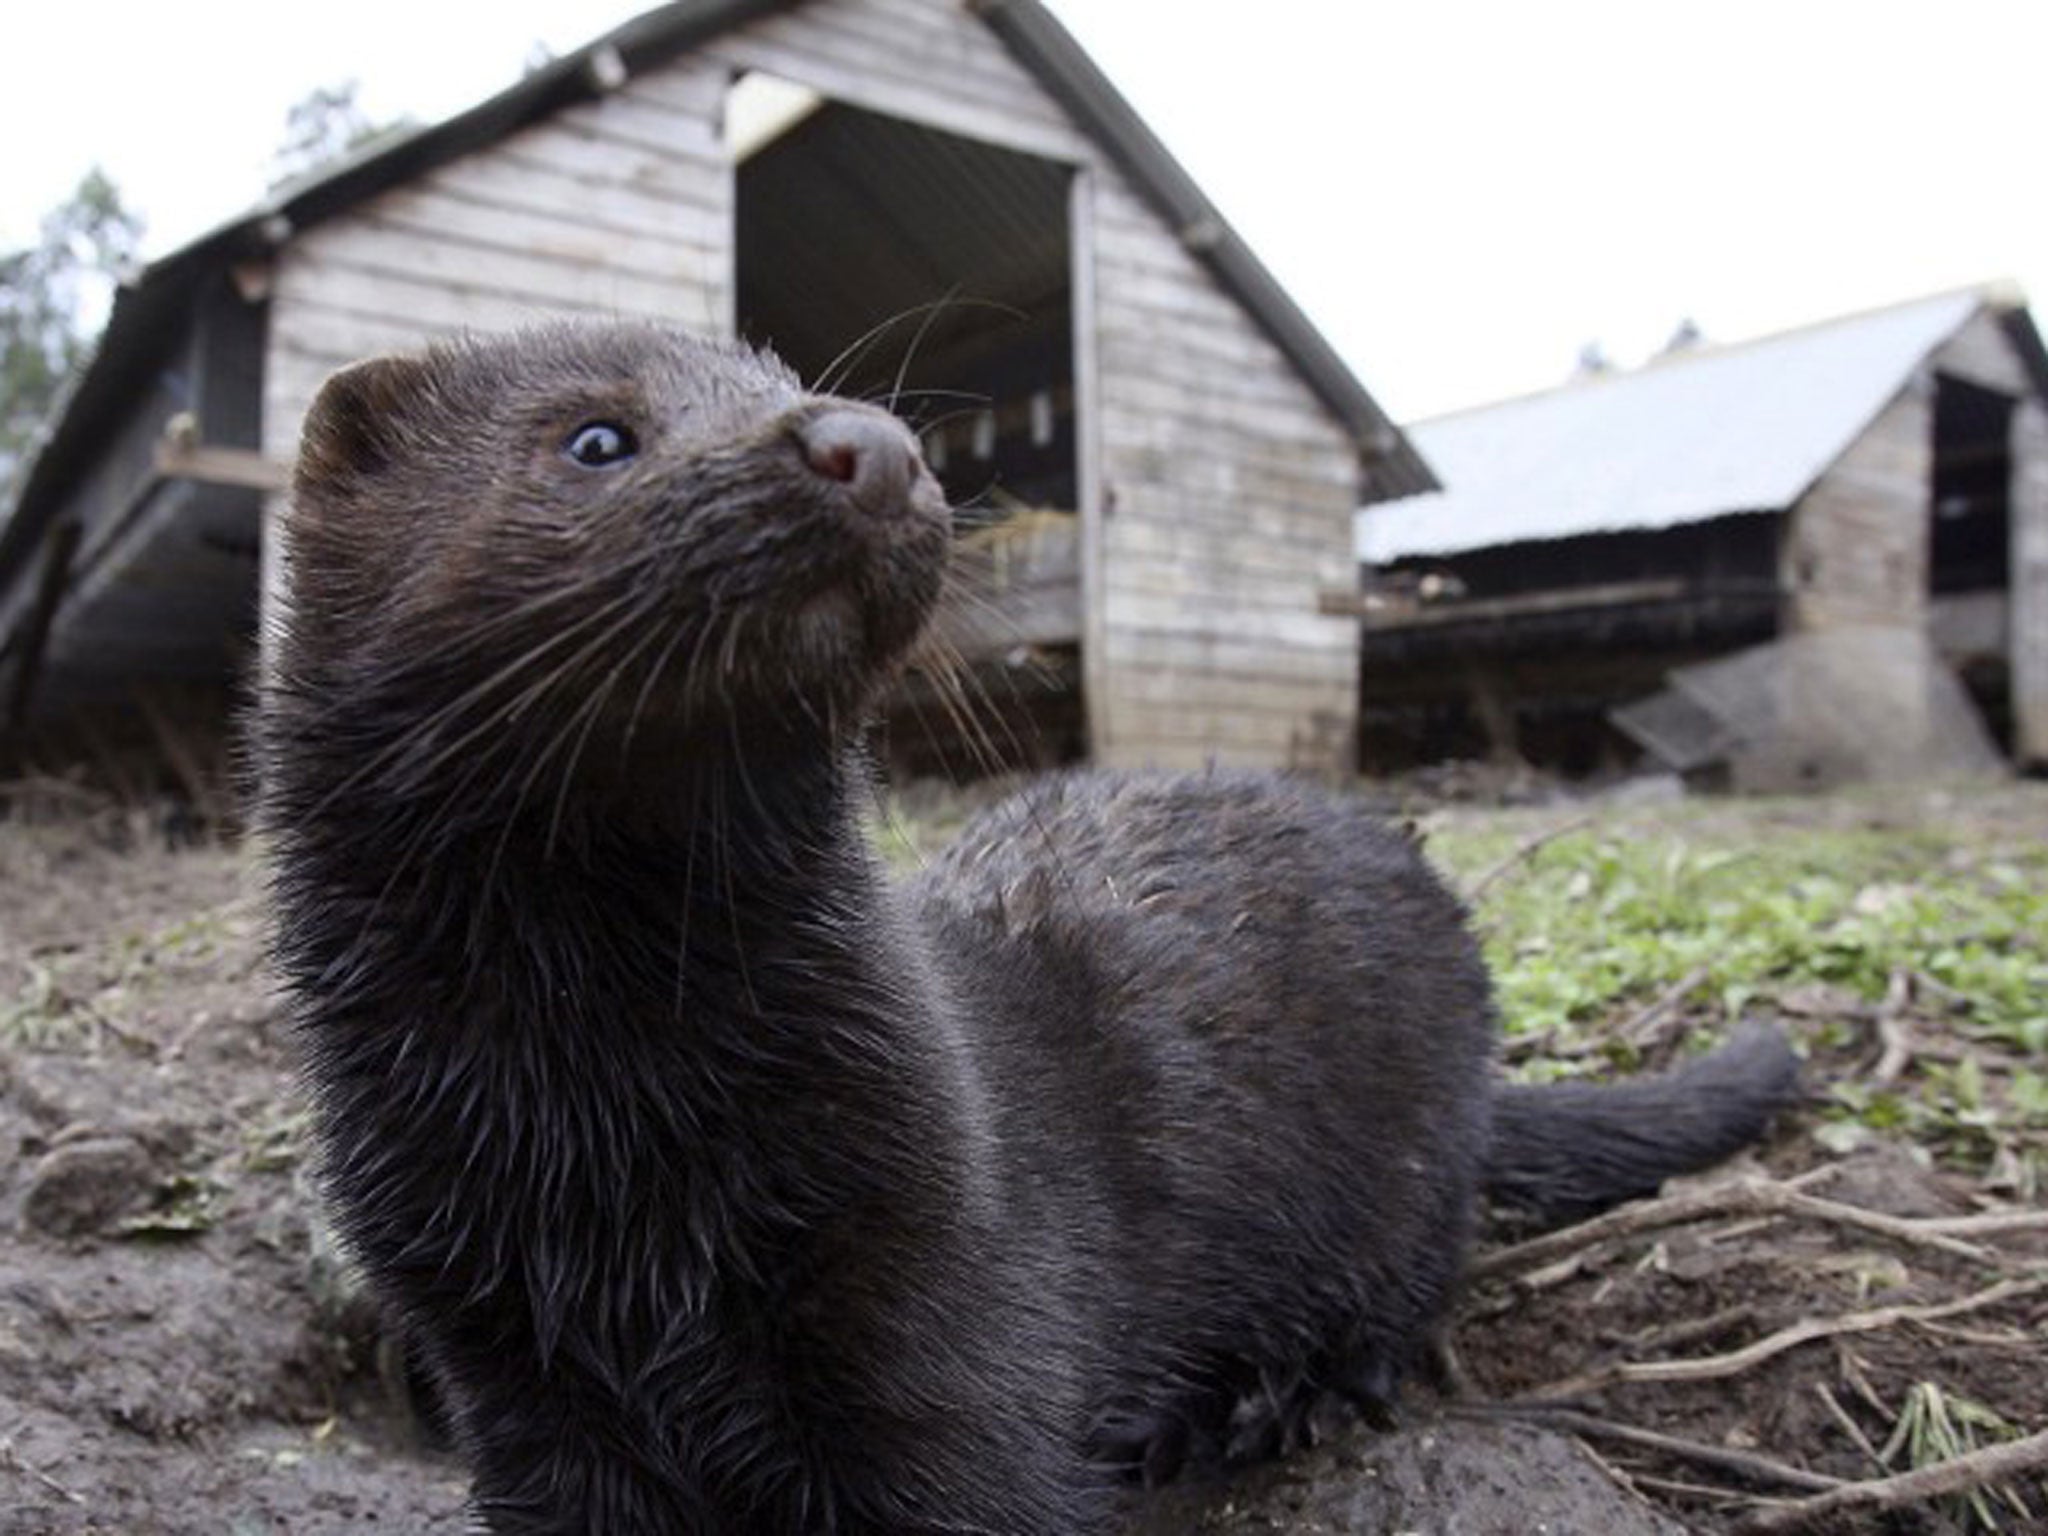 Low-flying jets caused such panic among hundreds of captive mink that they turned on their young and viciously attacked them